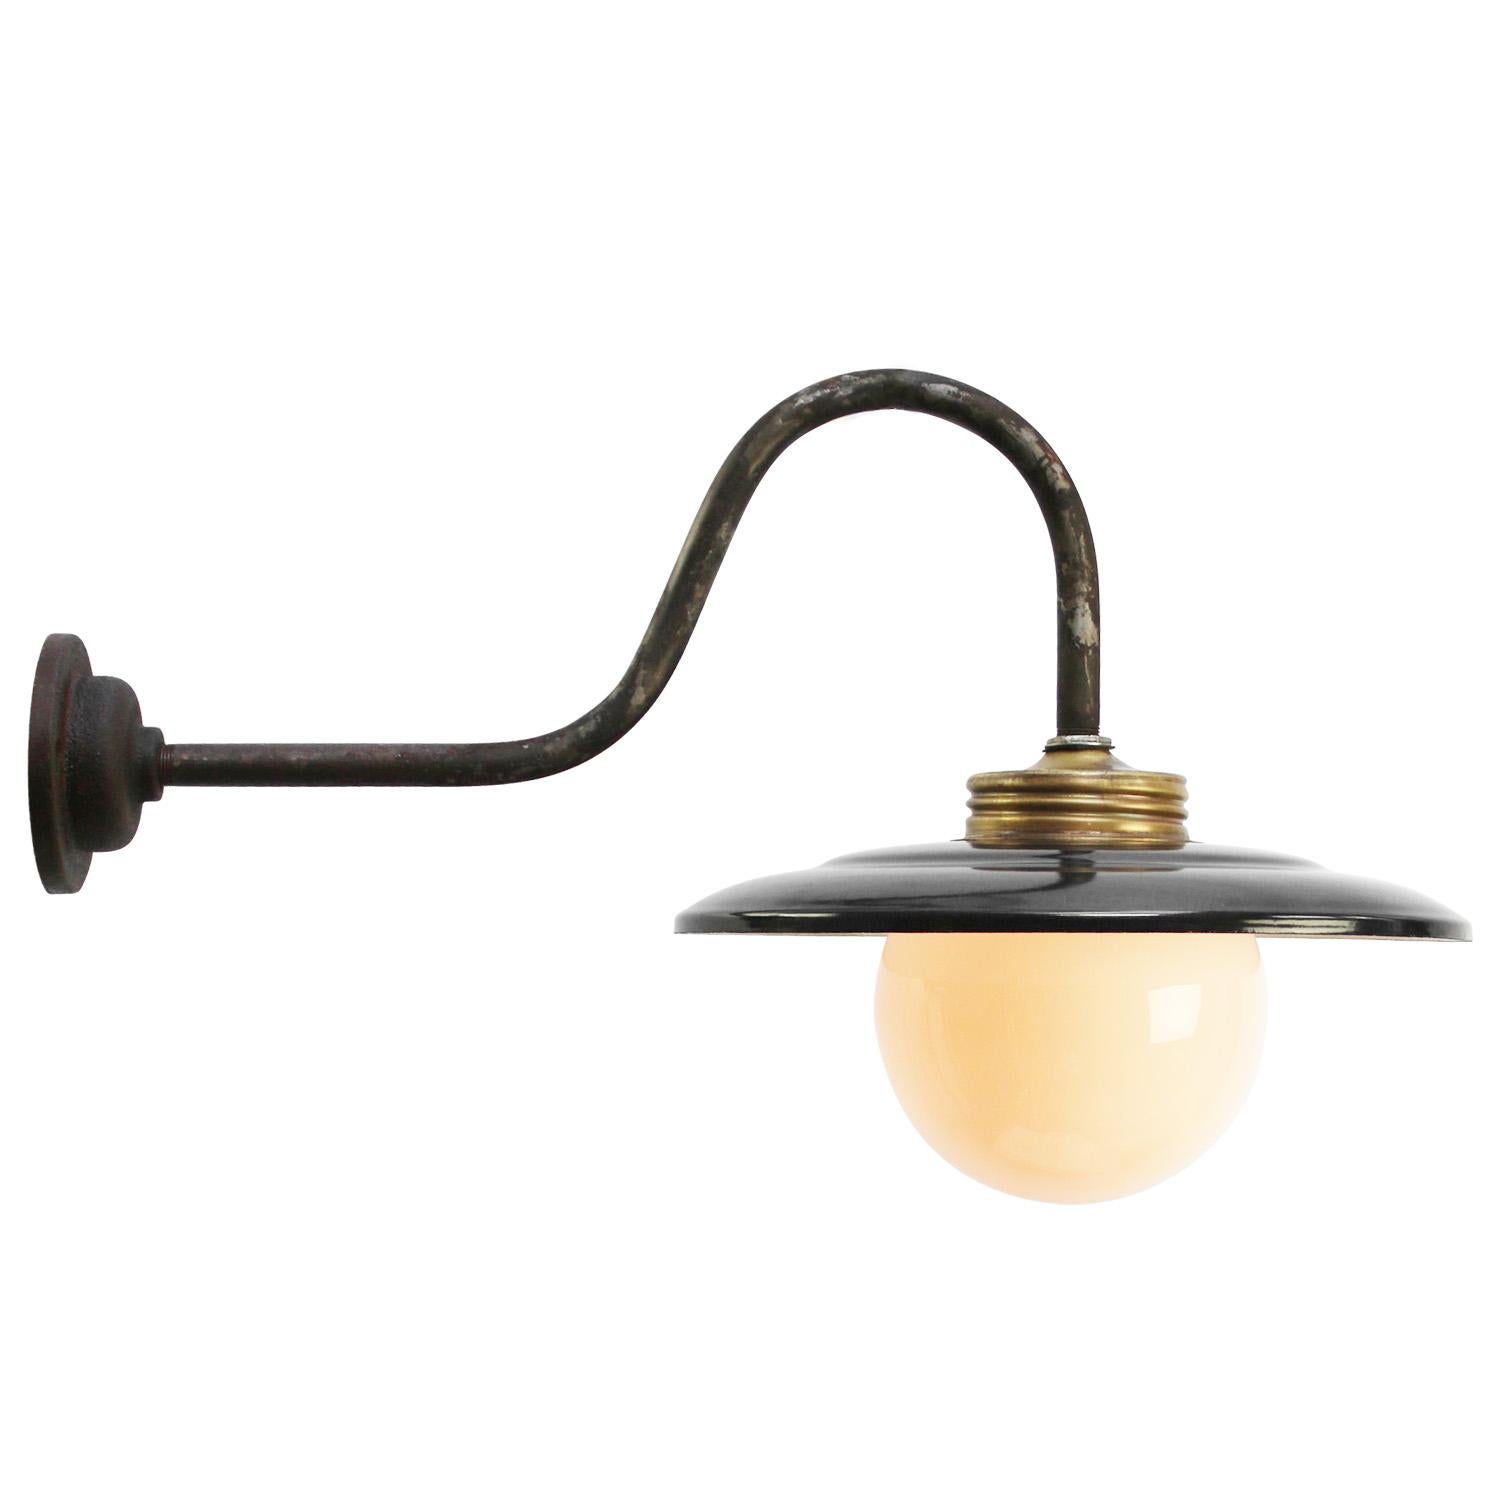 Black enamel industrial wall light with white interior.
cast iron, opaline glass globe.

diameter cast iron wall mount: 10.5 cm / 4” cm, 2 holes to secure.

Weight: 1.80 kg / 4 lb

Priced per individual item. All lamps have been made suitable by